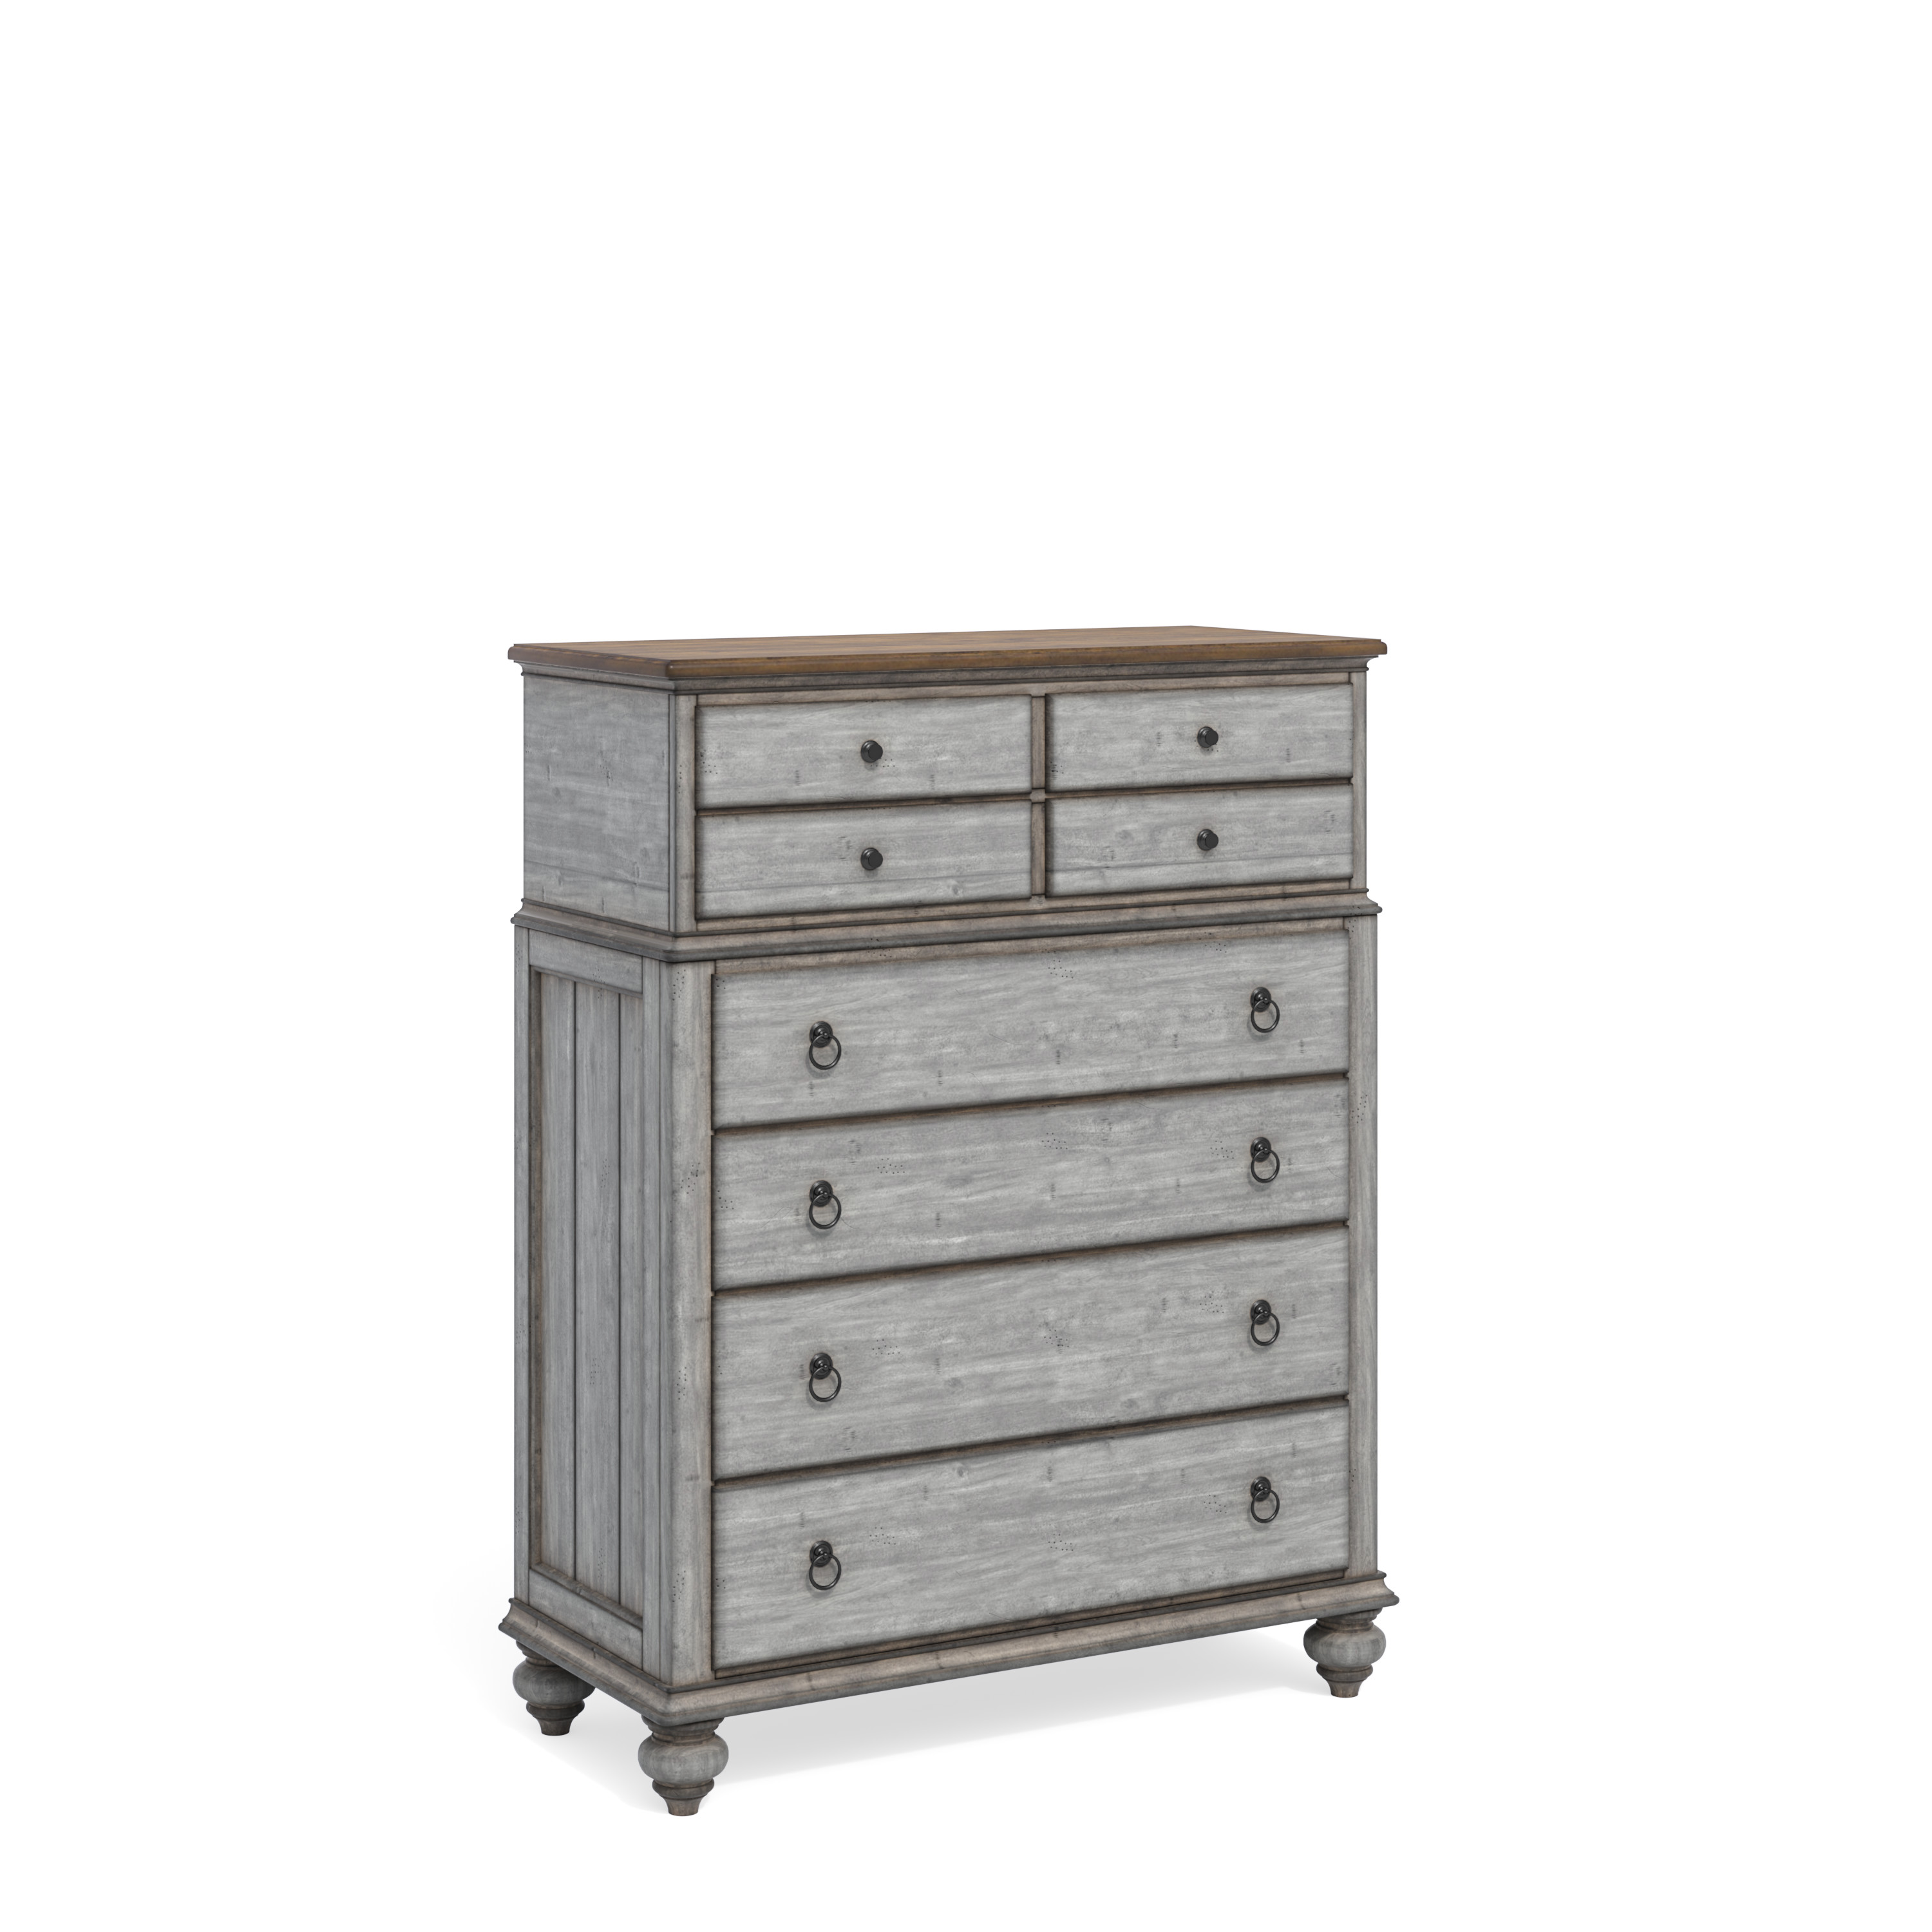 Flexsteel Plymouth Drawer Chest